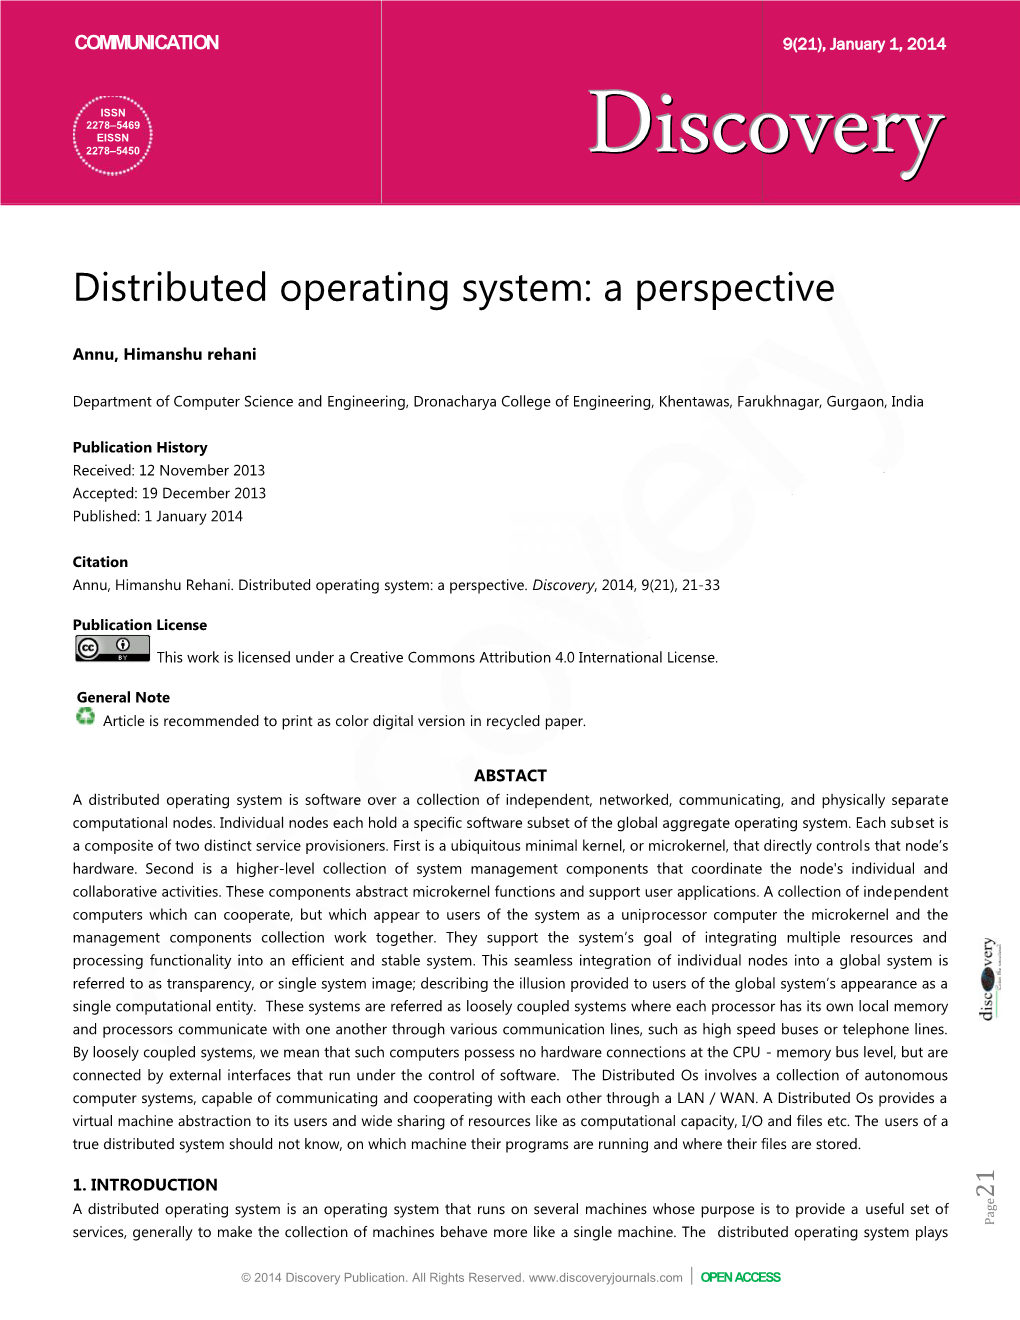 Distributed Operating System: a Perspective